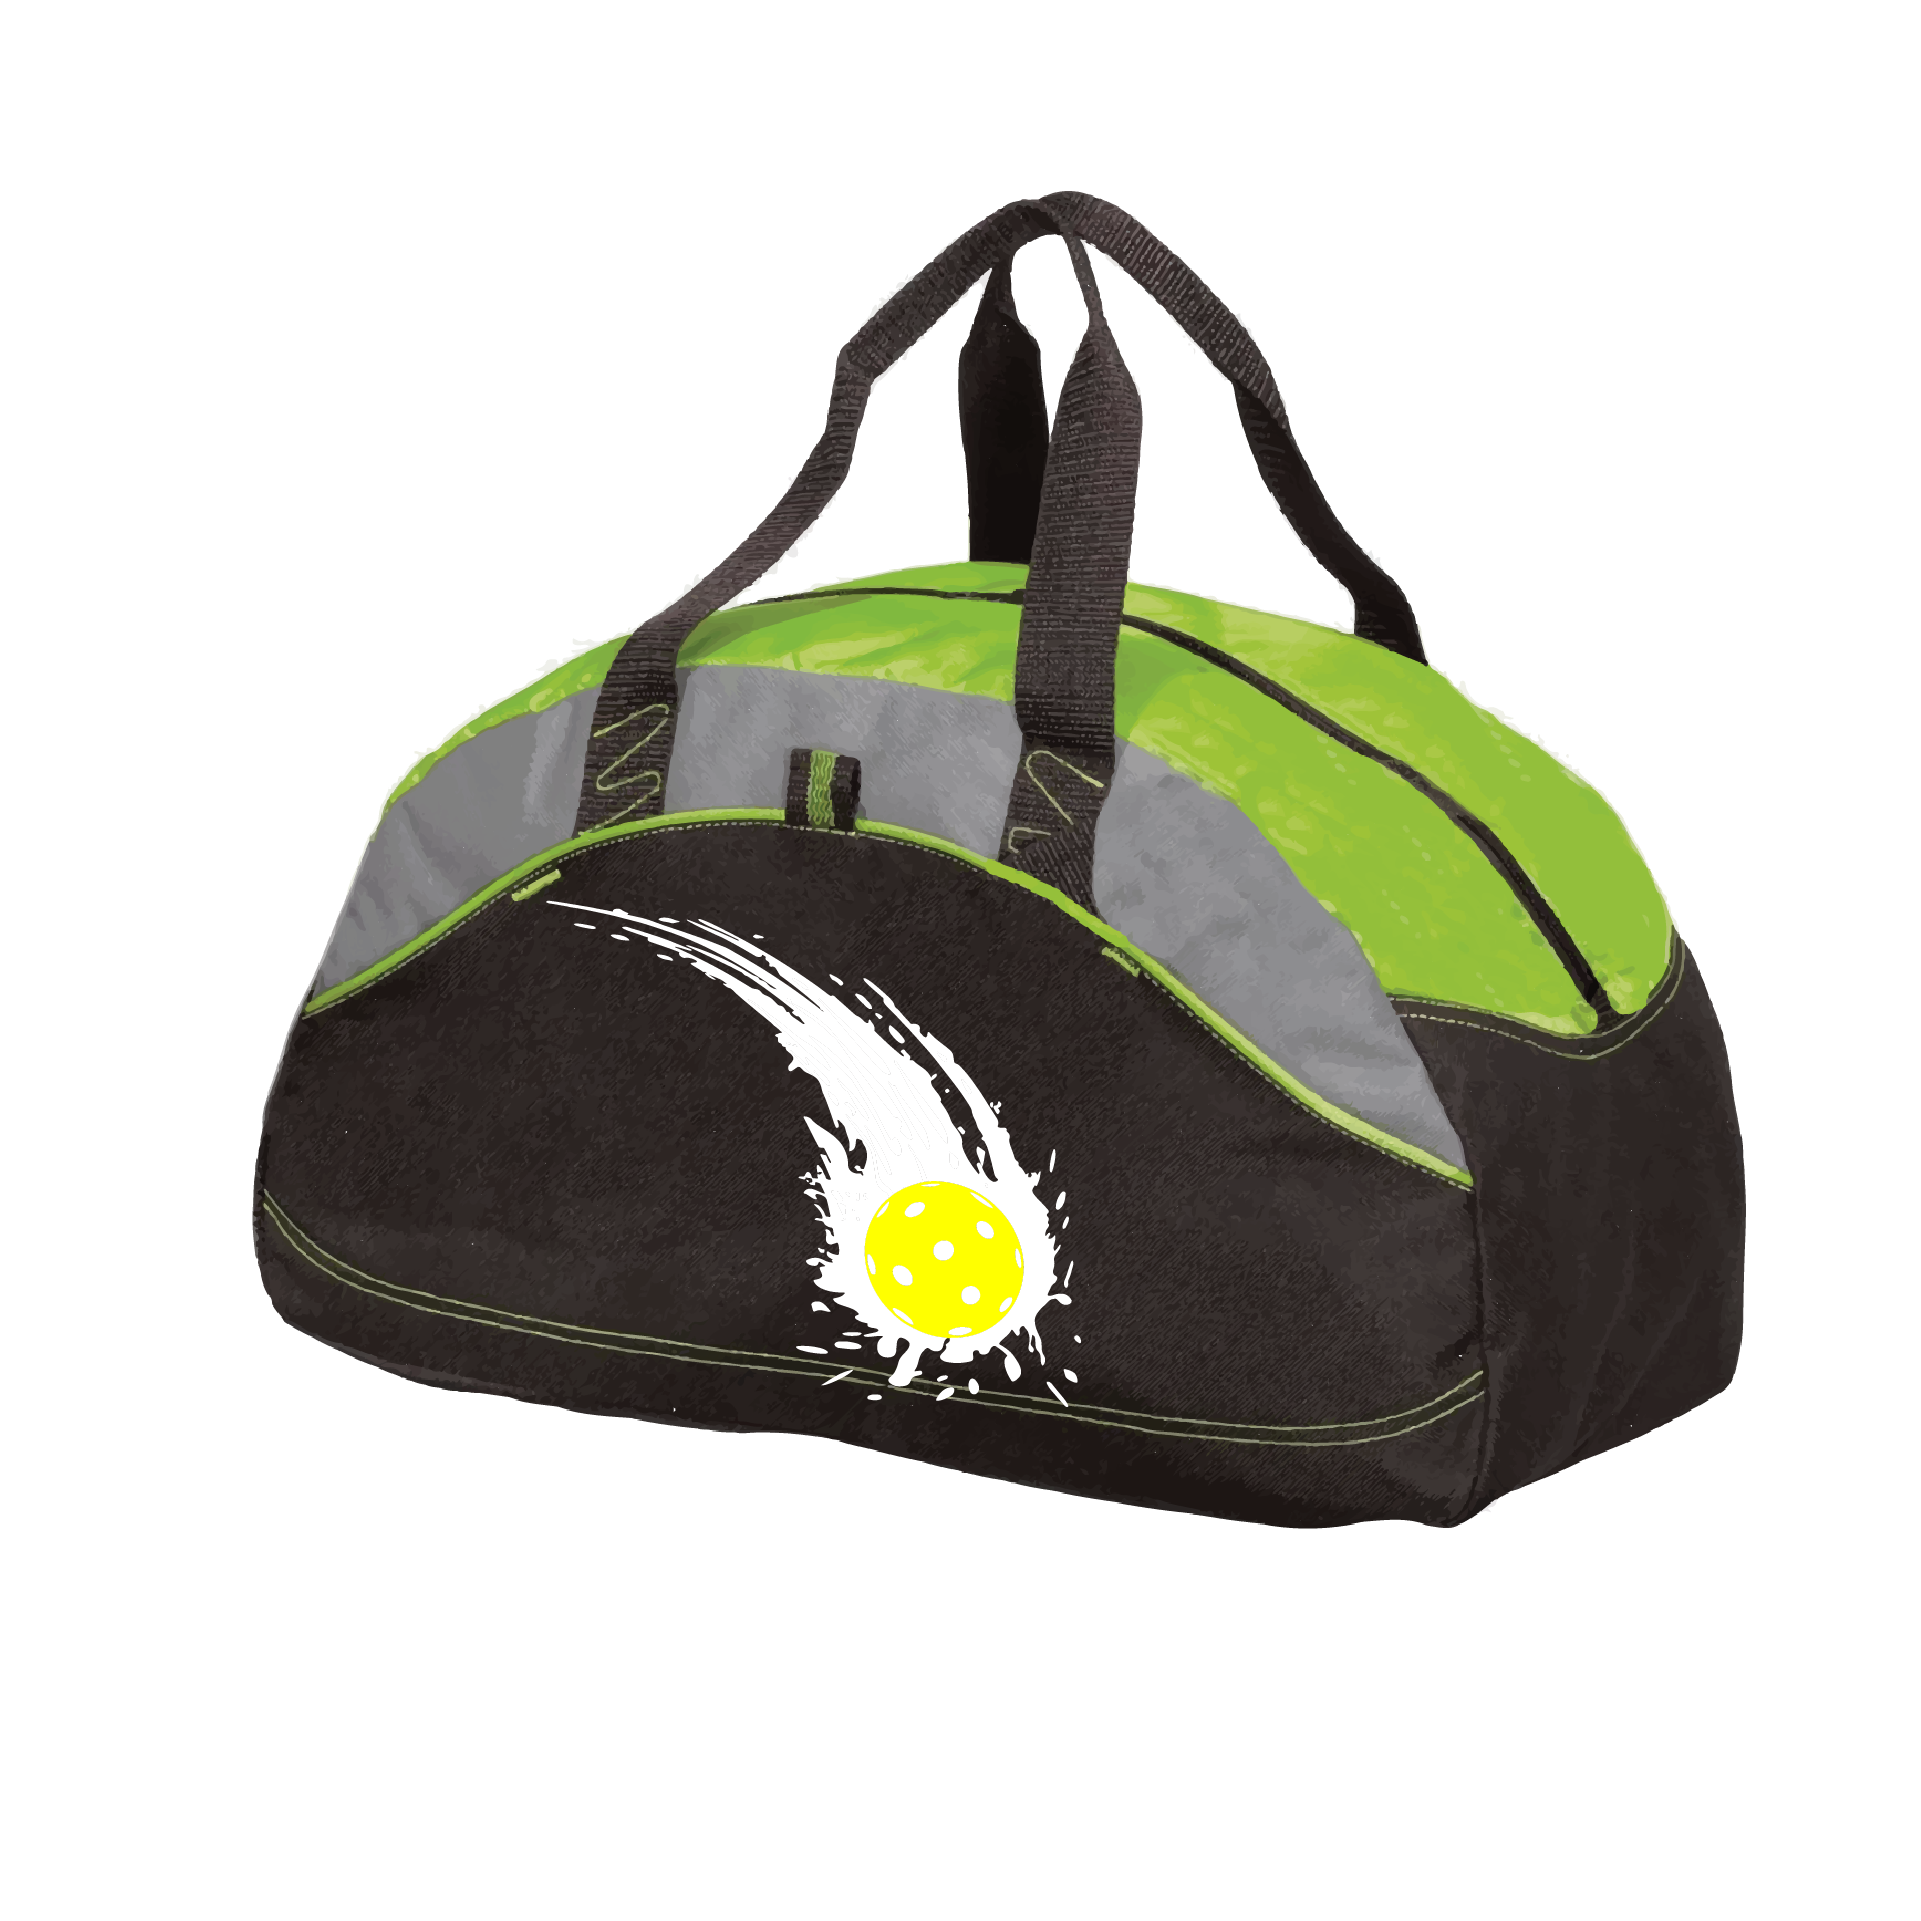 Pickleball Duffel Bag Design: Impact  Carry your gear in comfort and style. This fun pickleball duffel bag is the perfect accessory for all pickleball players needing to keep their gear in one place. This medium sized duffel tote is ideal for all your pickleball activities. The large center compartment allows for plenty of space and the mesh end pocket is perfect for holding a water bottle. 